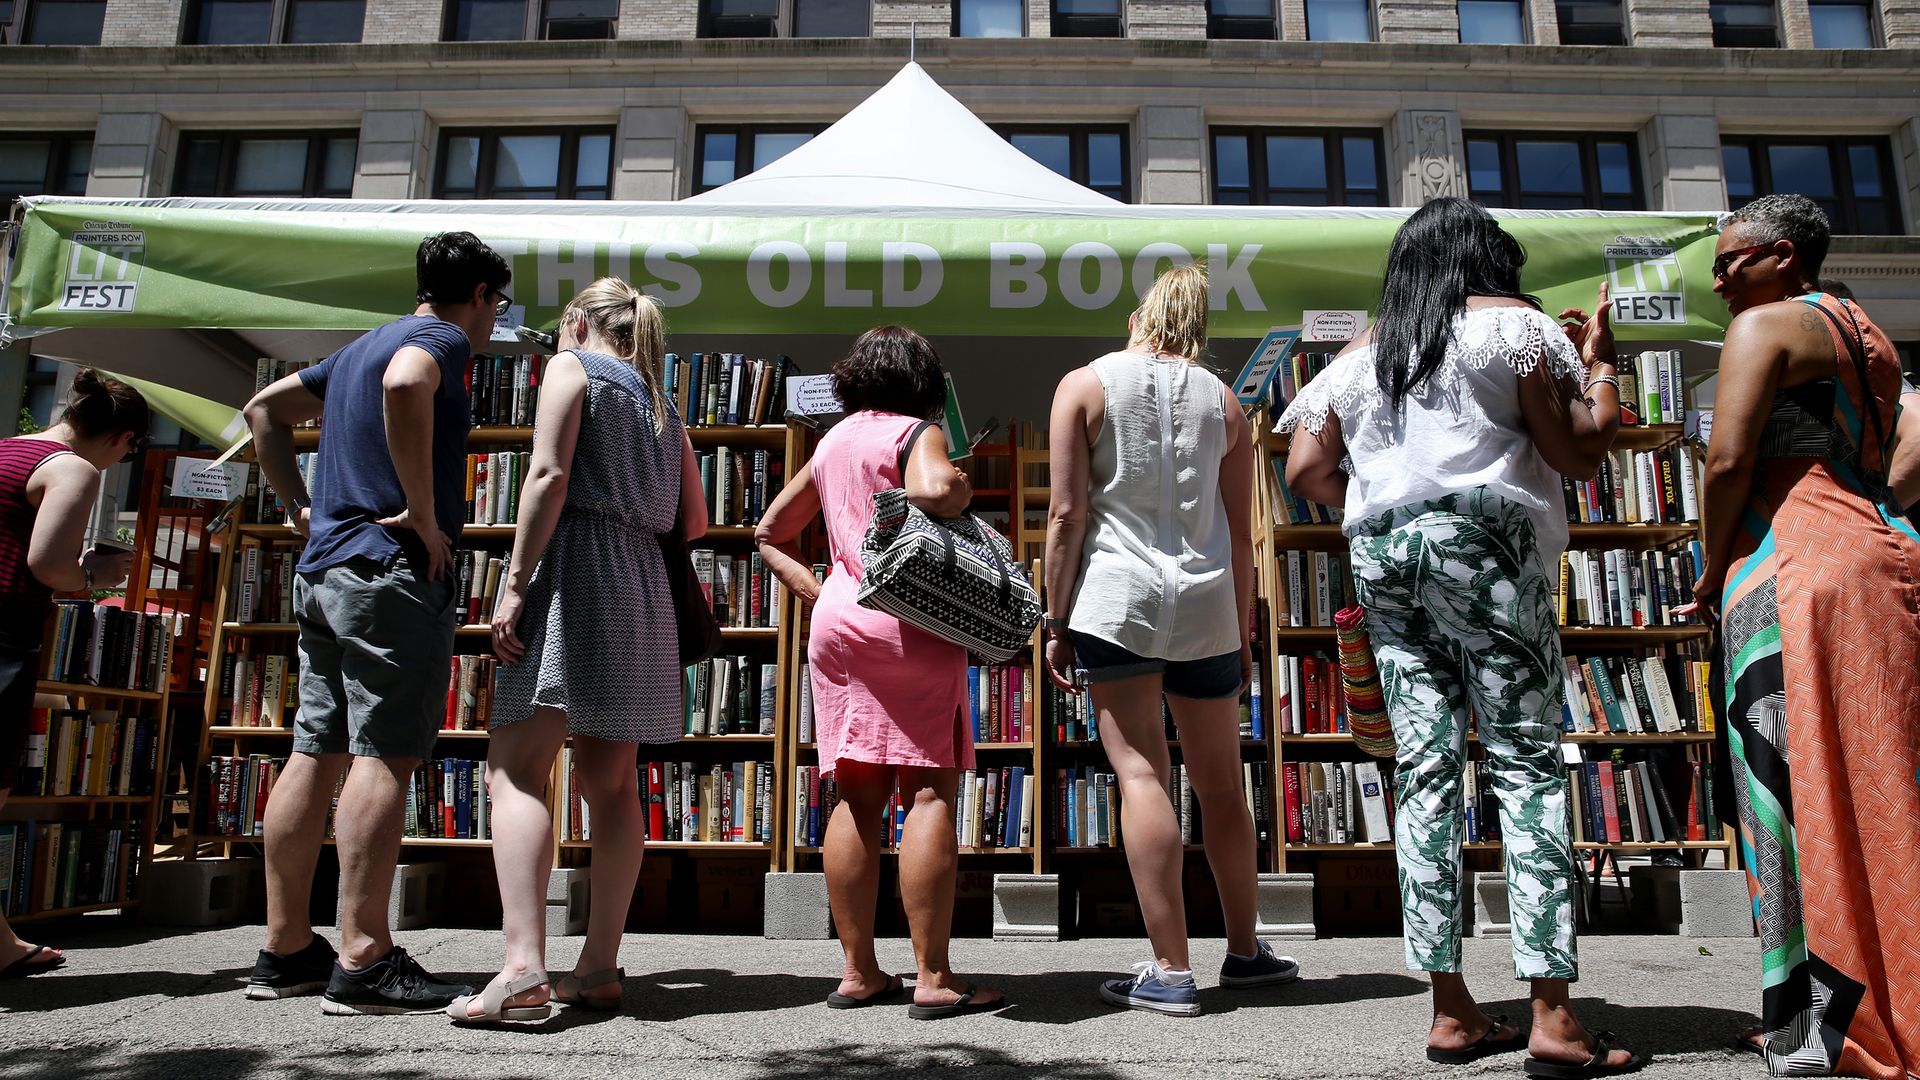 Attendees of the Printer's Row Lit Fest in Chicago looking at shelves of books 